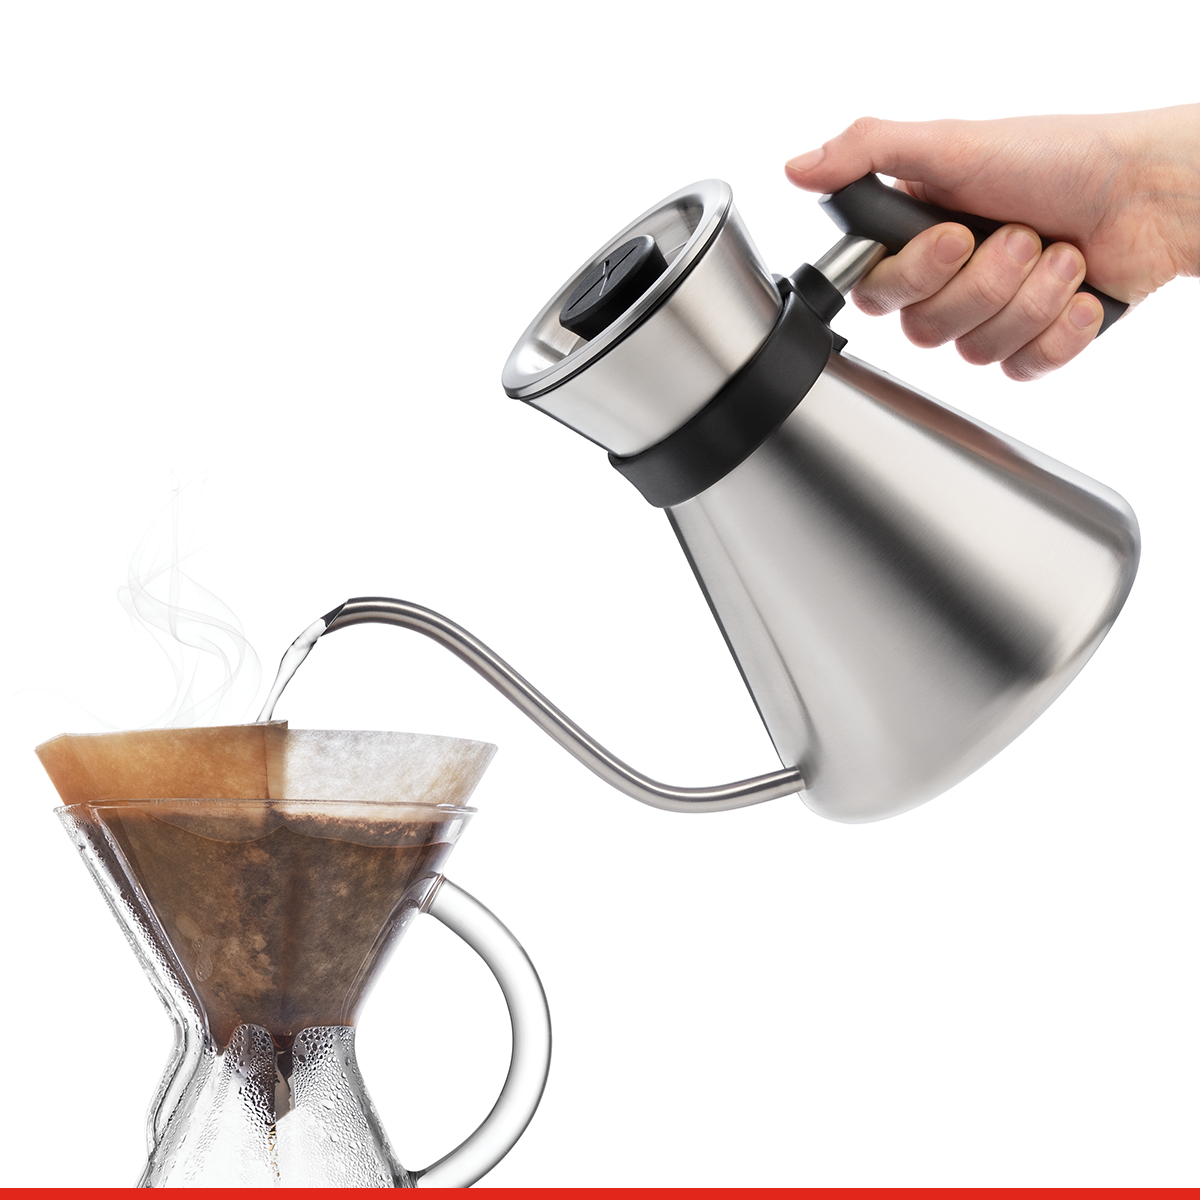 https://store.chemexcoffeemaker.com/media/catalog/product/c/h/chemex-ss-chettle-in-use_2.png